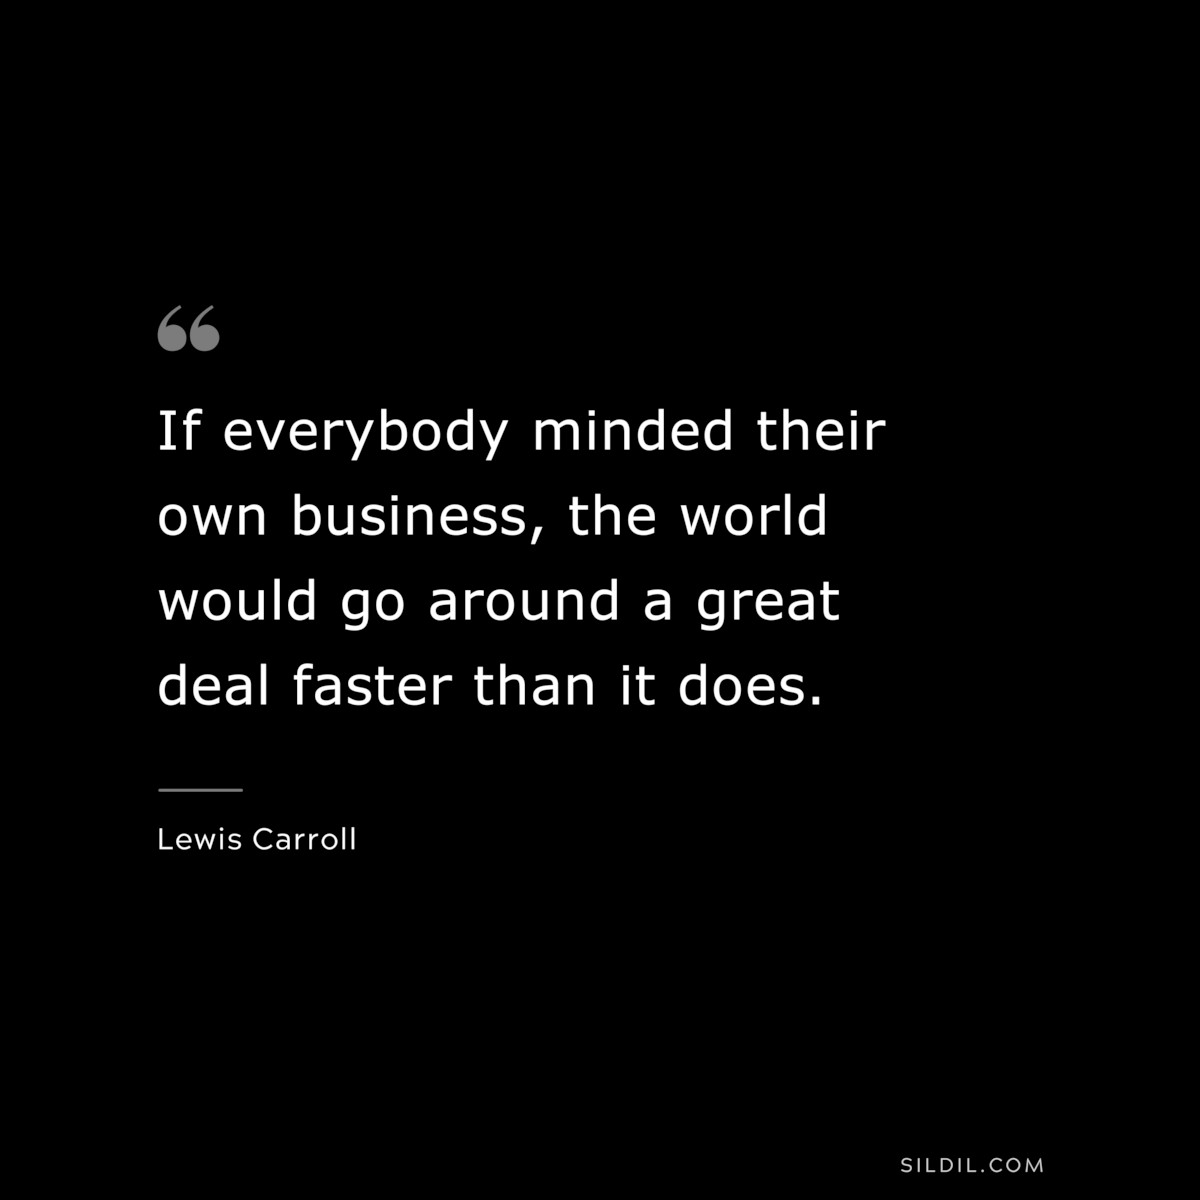 If everybody minded their own business, the world would go around a great deal faster than it does.